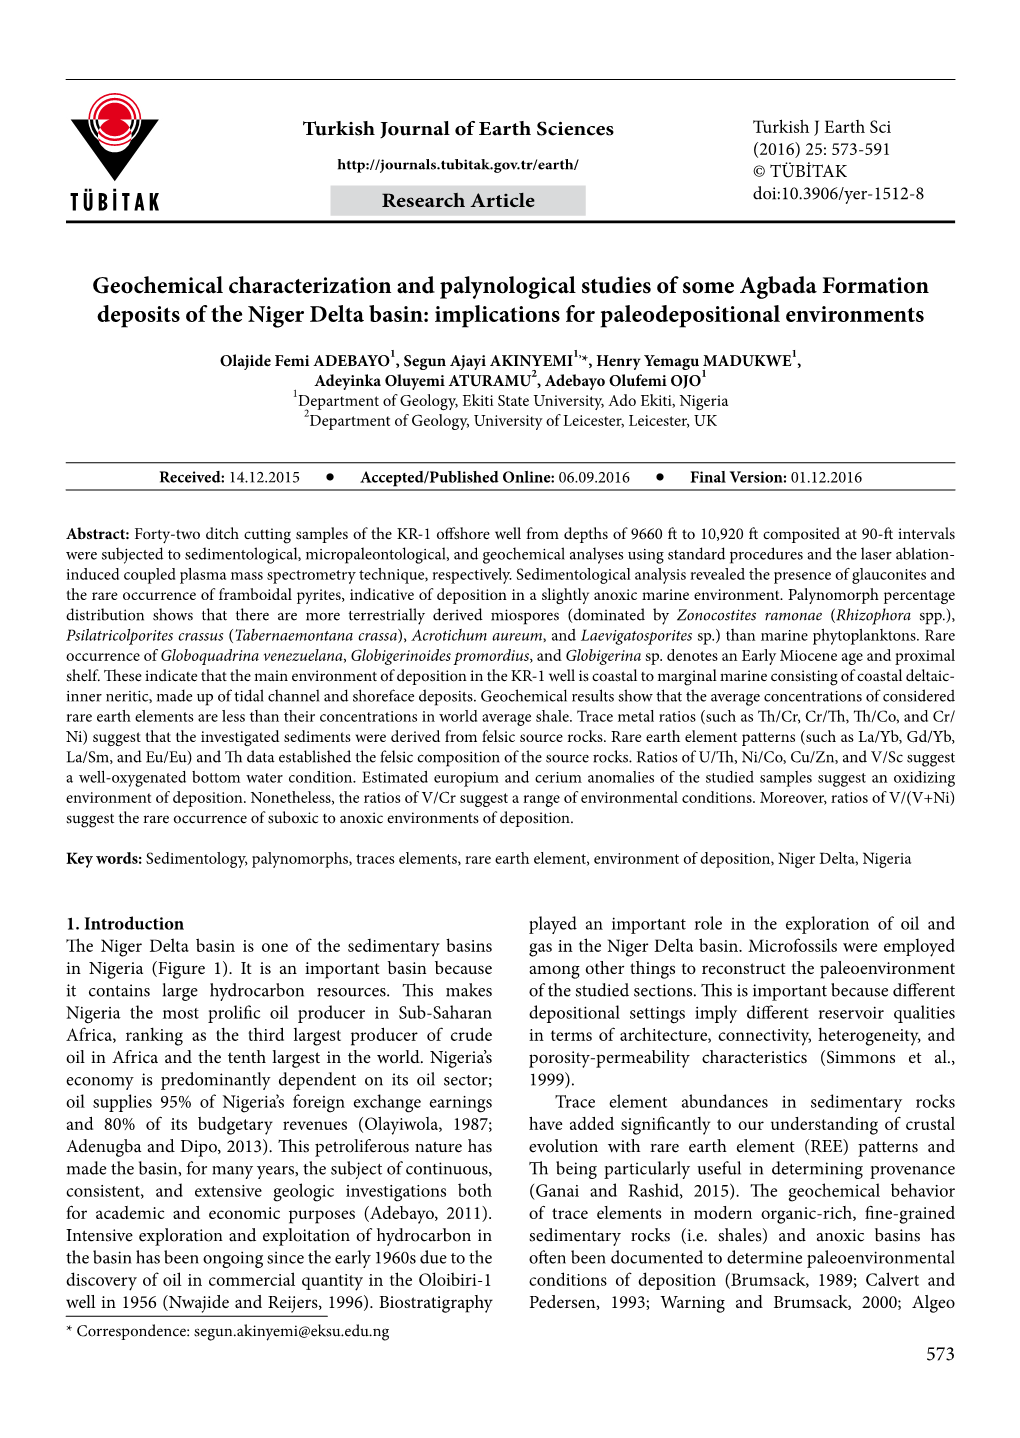 Geochemical Characterization and Palynological Studies of Some Agbada Formation Deposits of the Niger Delta Basin: Implications for Paleodepositional Environments